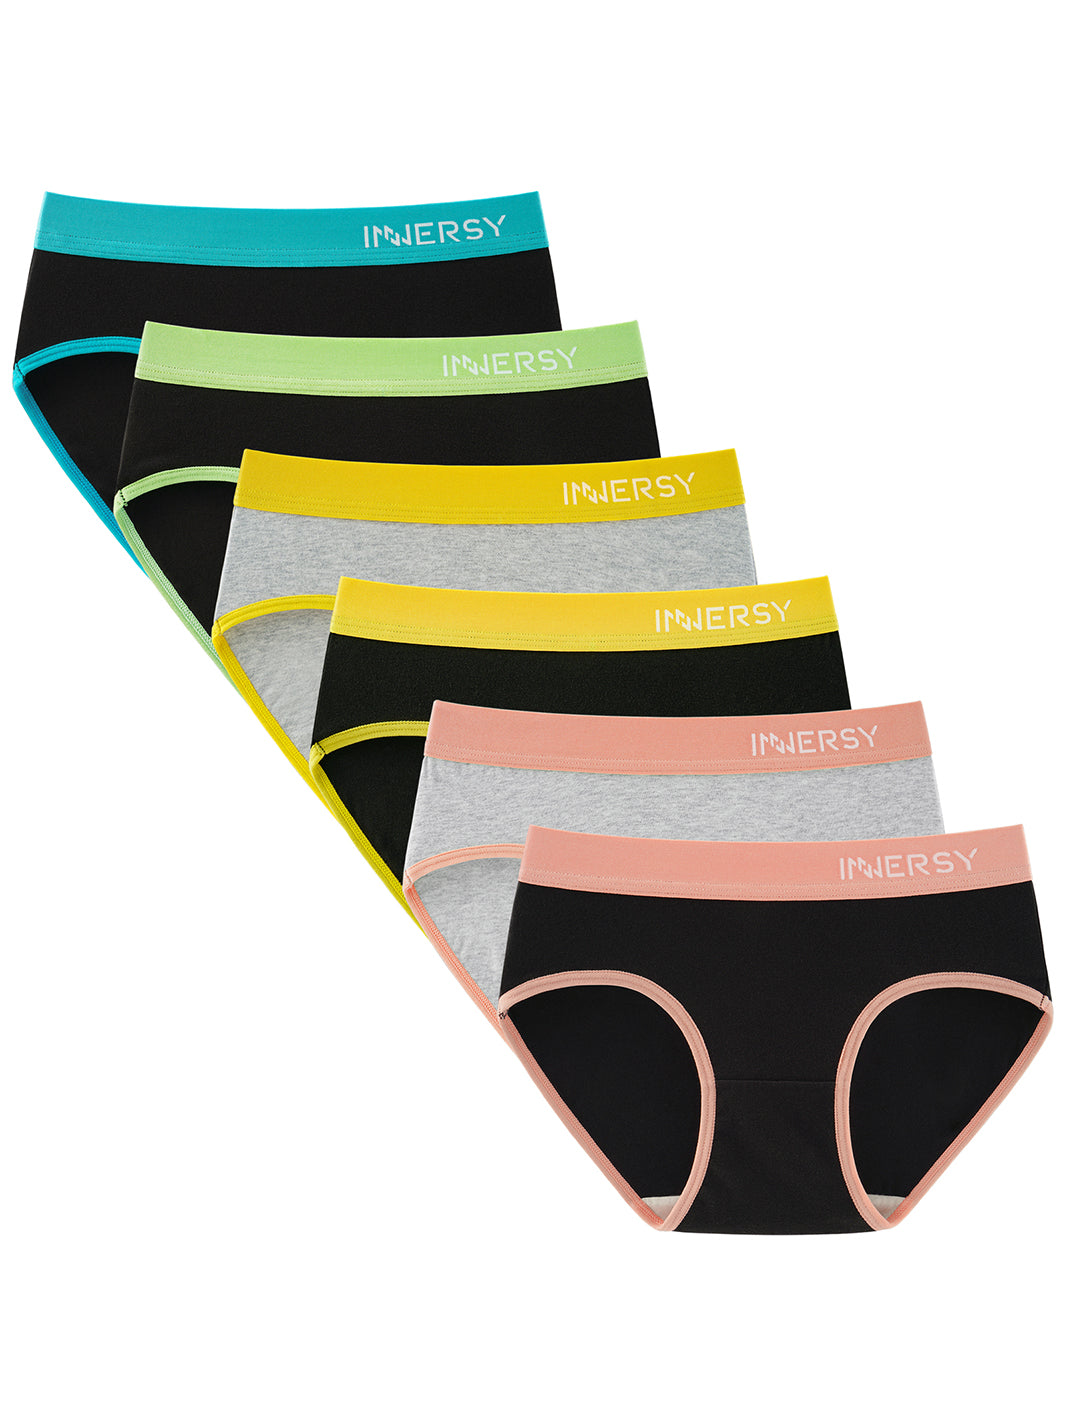 Teen Girls' Contrasting Color Briefs 6-Pack